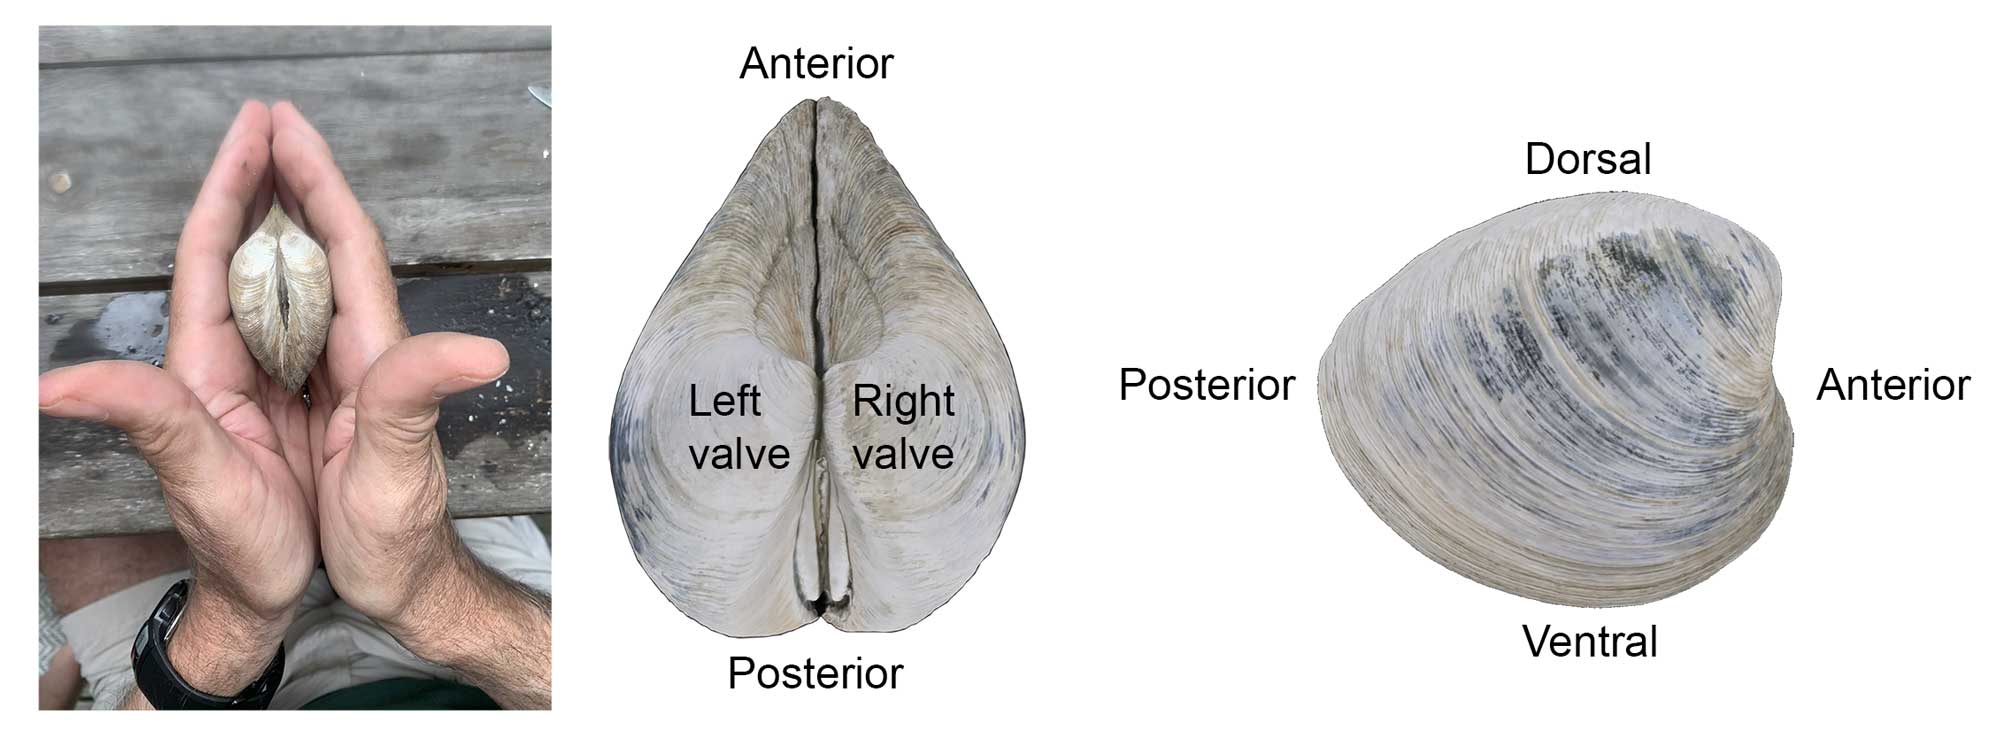 Illustration showing how to differentiate a left and right valve on a clam, as wells the relative orientations of the dorsal, ventral, posterior, and anterior sides of a clam shell.